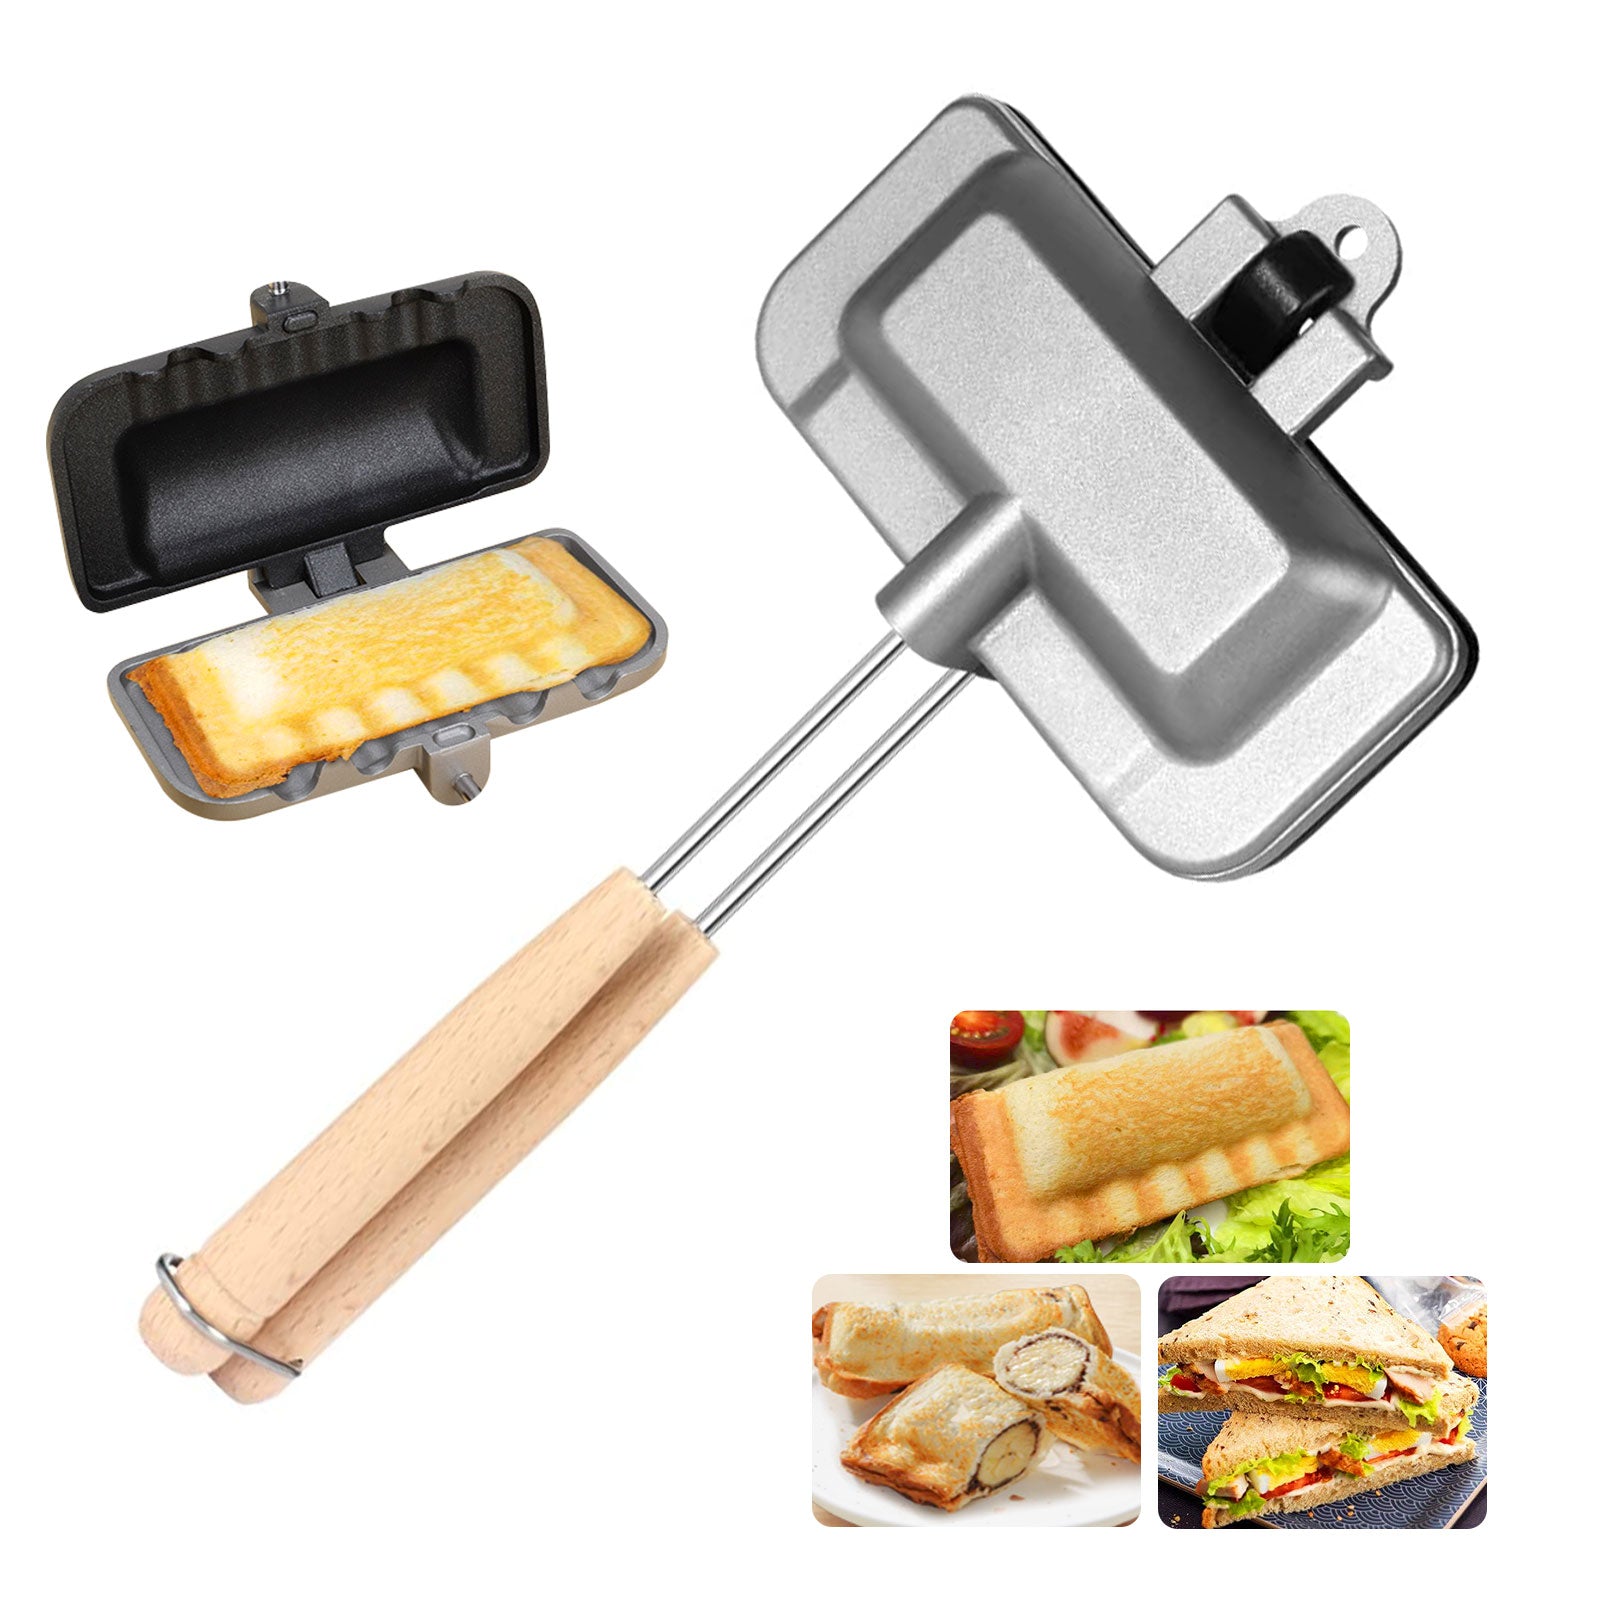 Hot Sandwich Maker, Hot Dog Toaster, Double-sided Sandwich Baking Pan,  Double Sided Frying Pan, For Grilled Cheese Maker